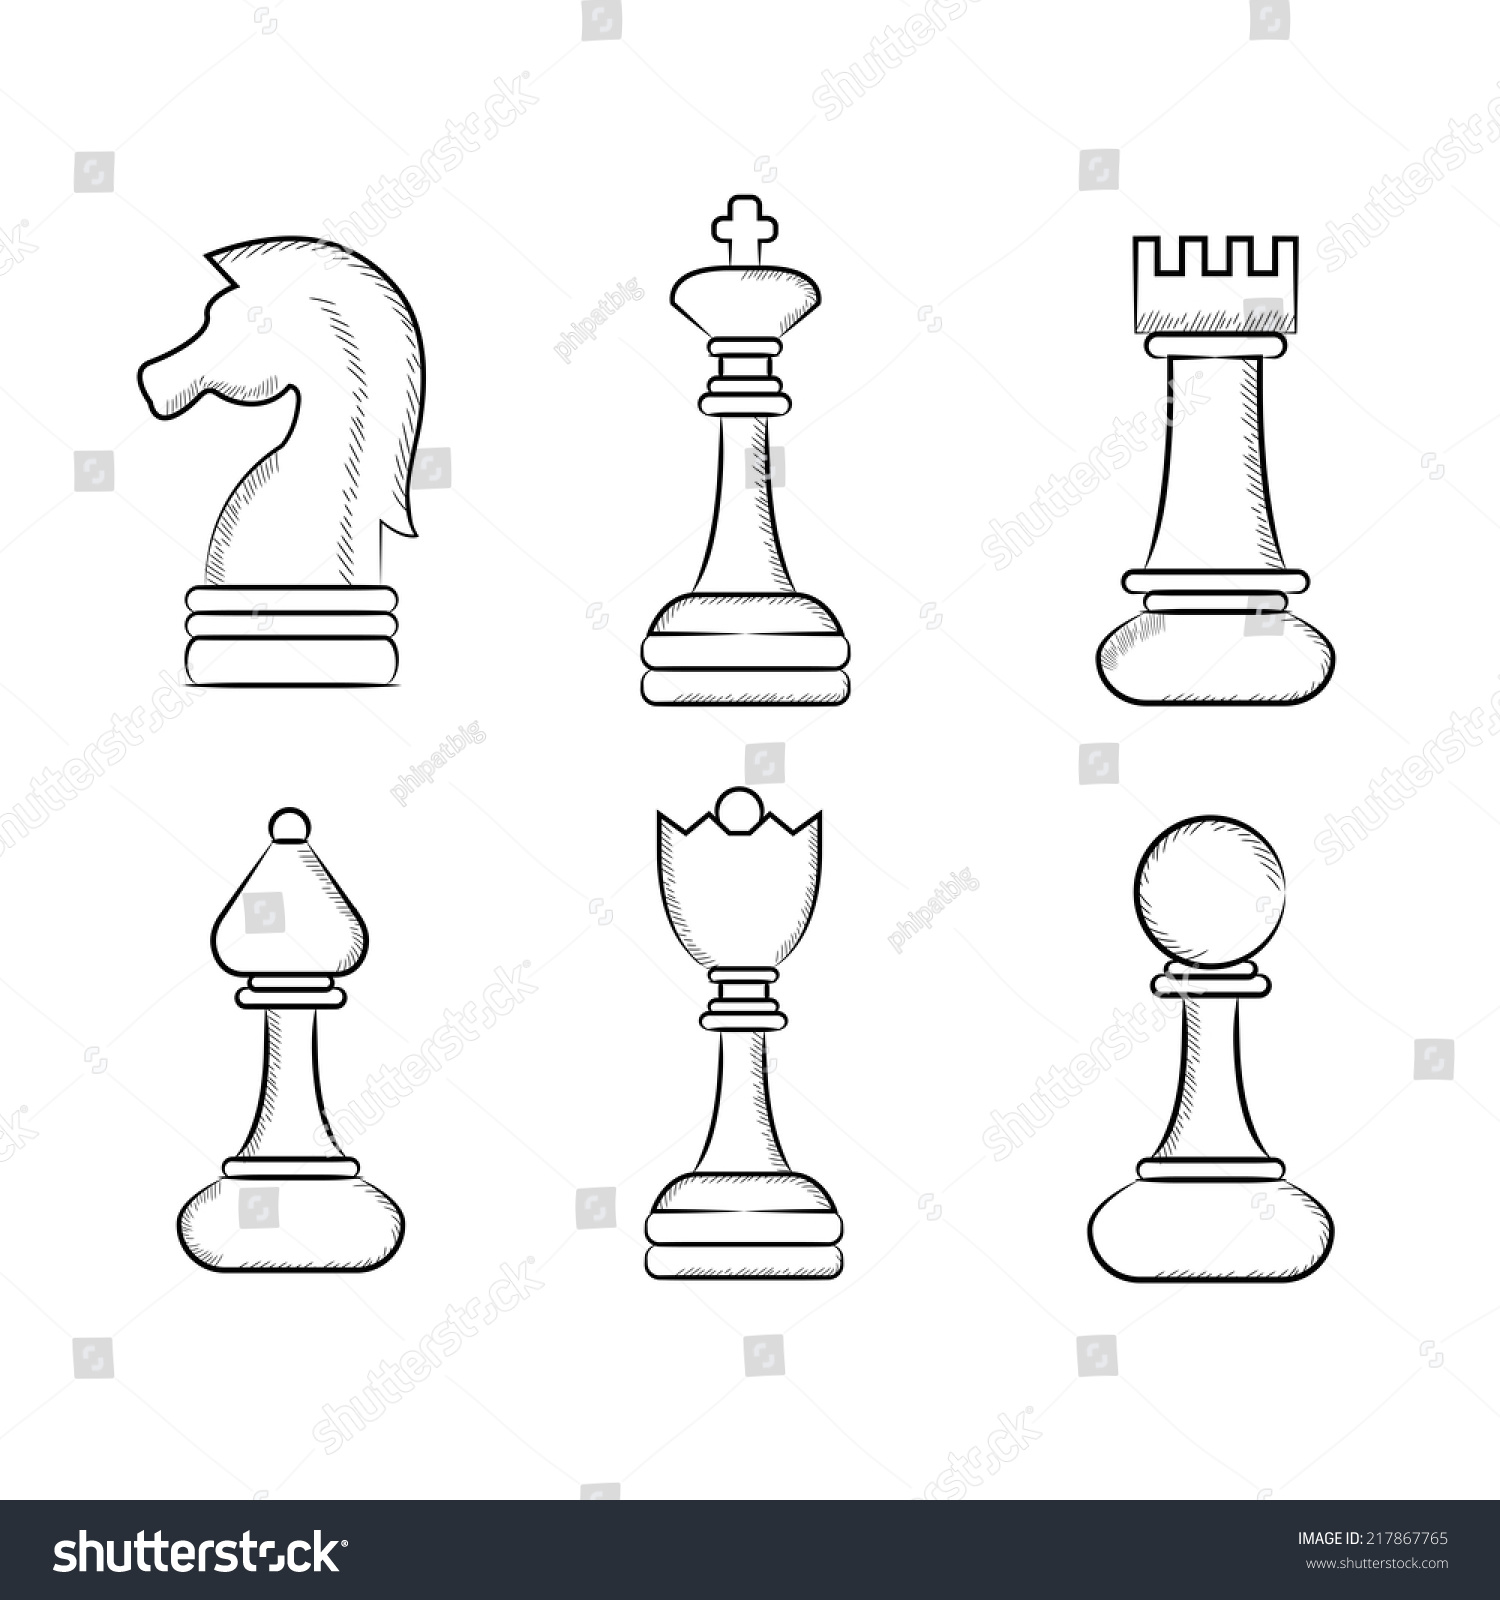 Chess Icons Sketch Chess Set Stock Vector 217867765 - Shutterstock